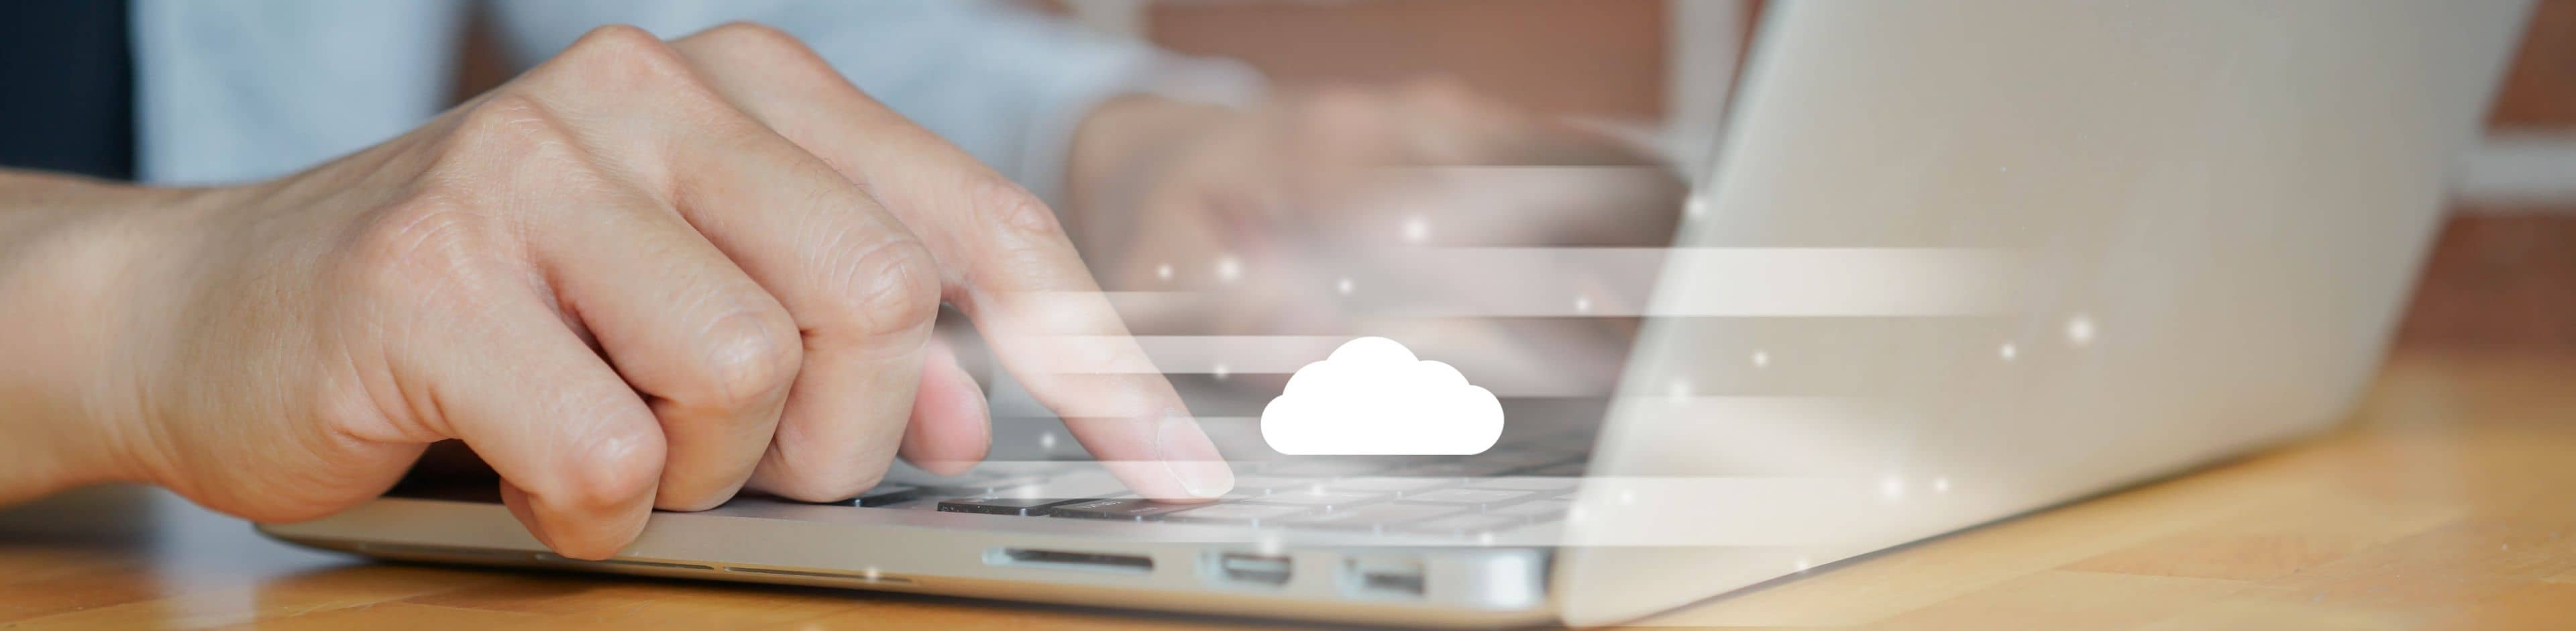 Benefits of adopting a cloud-based practice management for your law firm